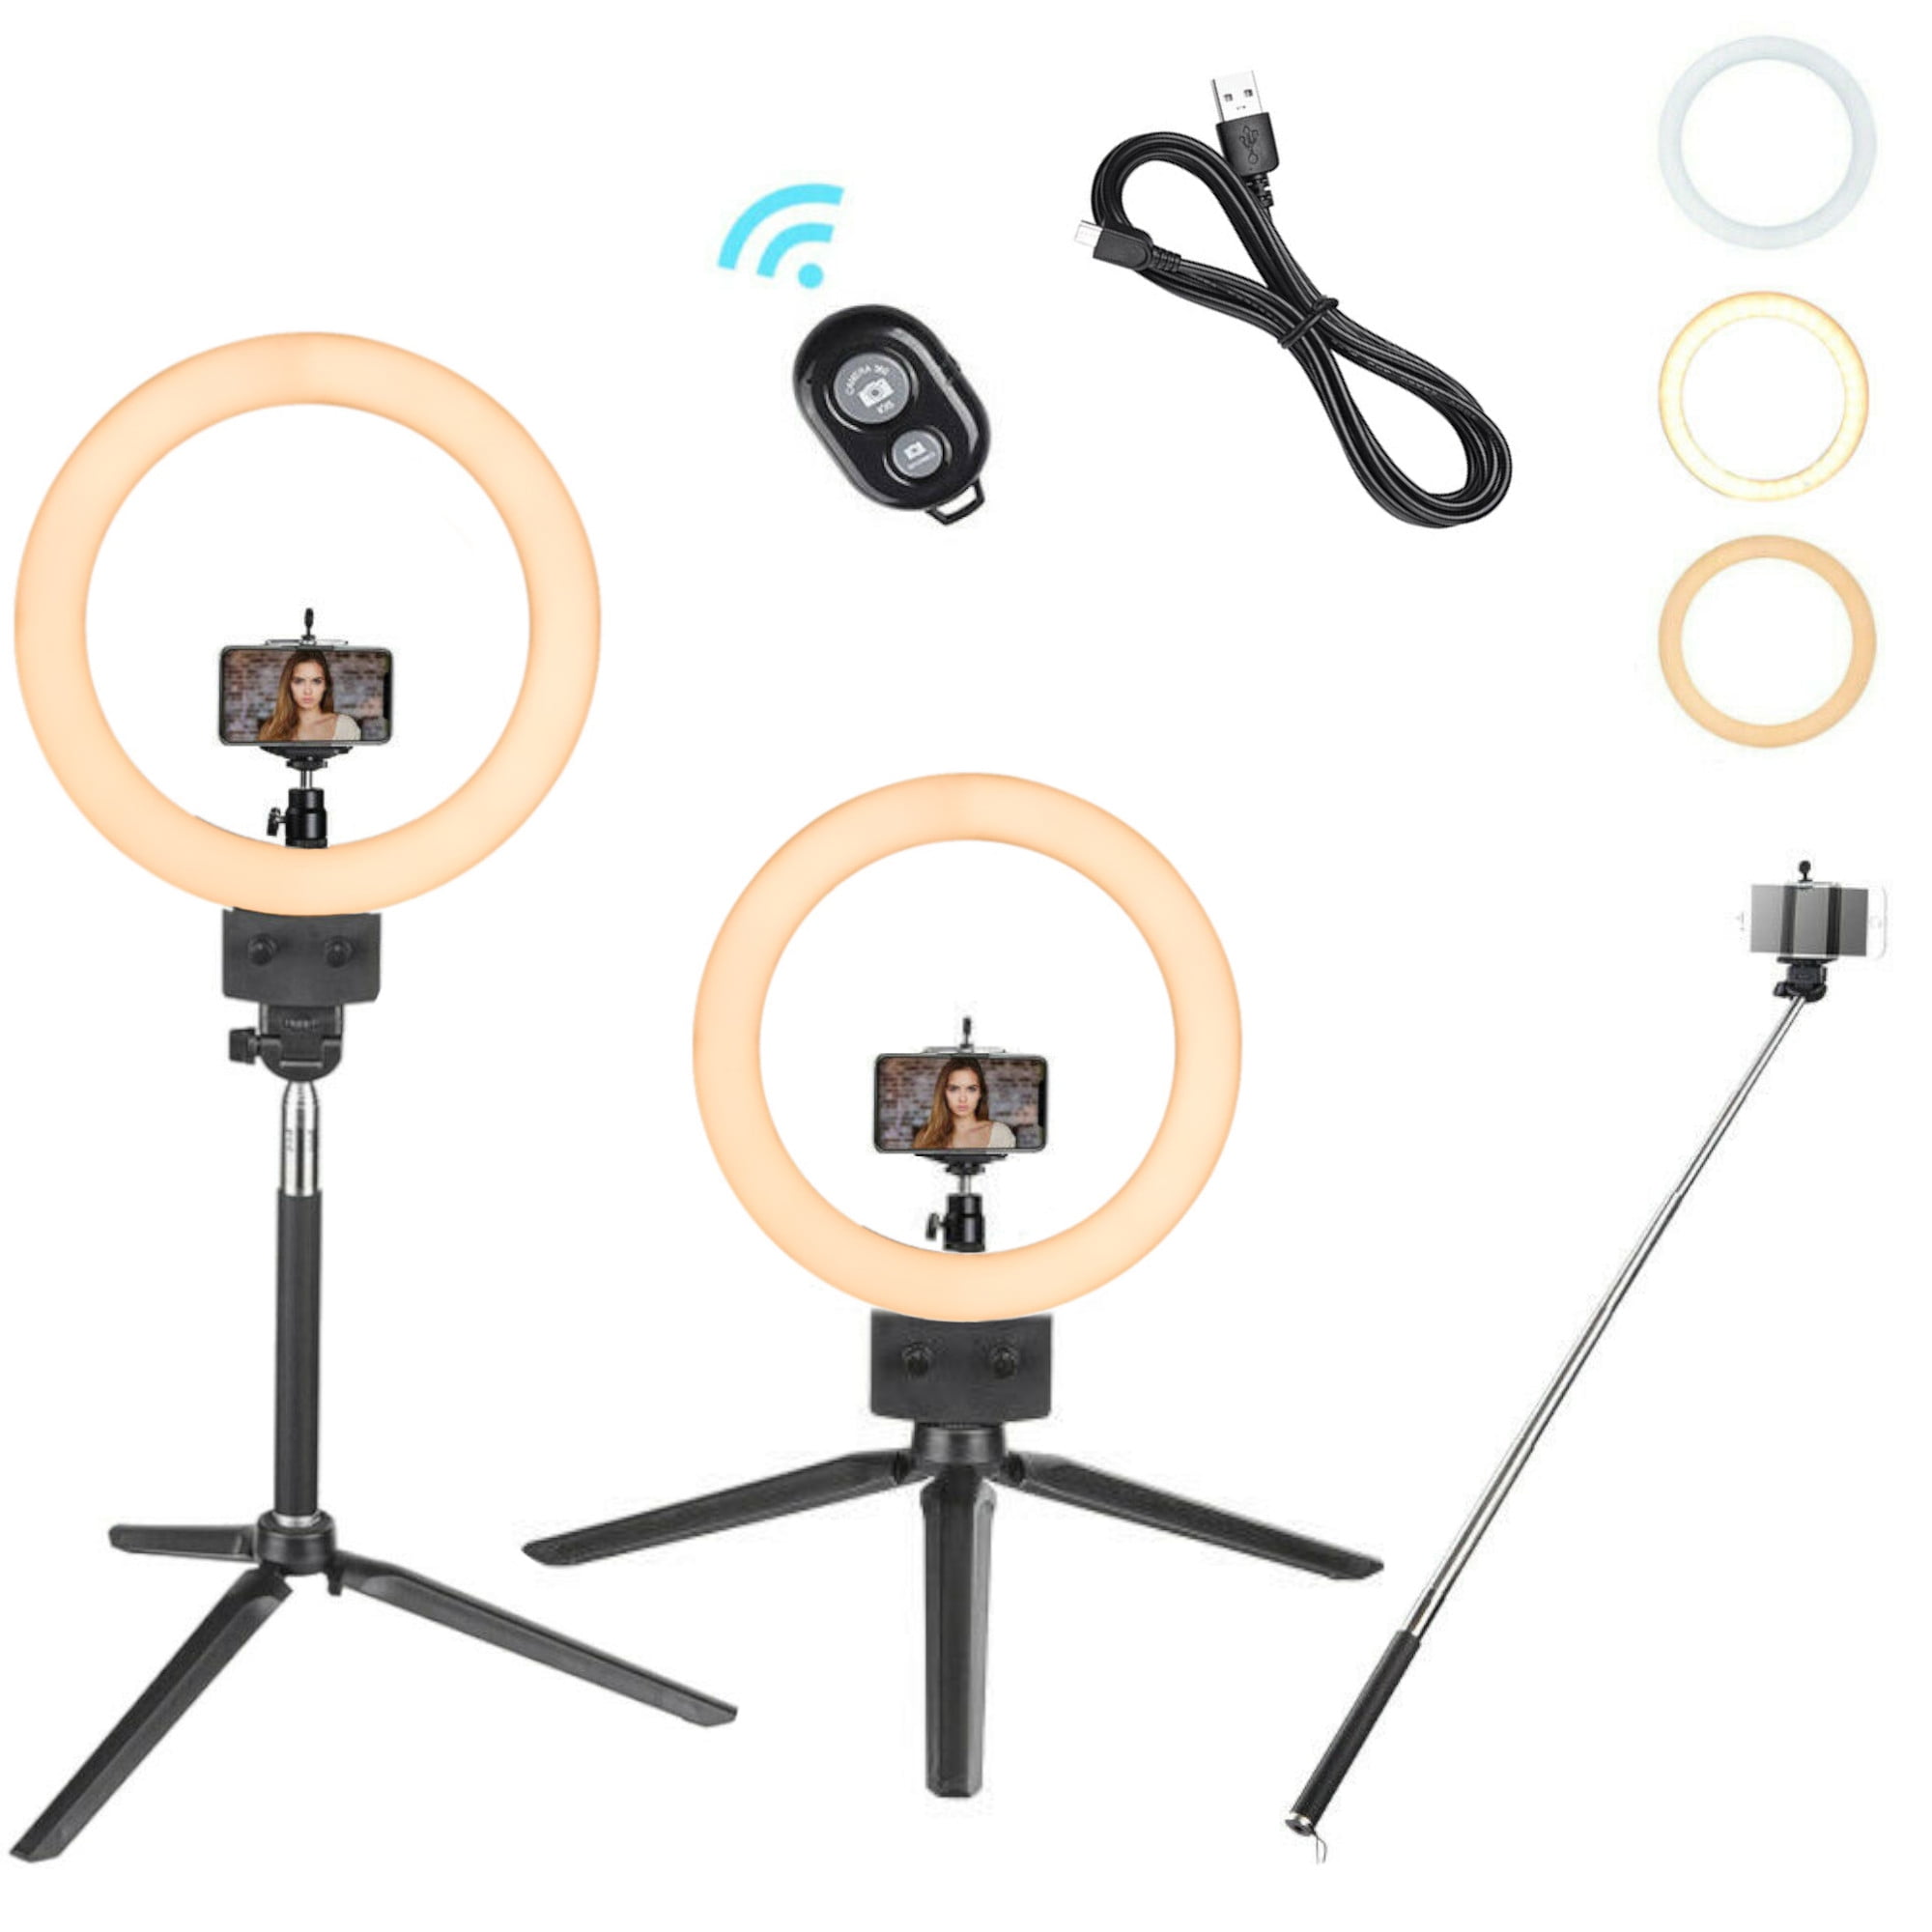 LED Ring Light 18" Dimmable Phone Selfie Make Up Youtube Live Video Camera 